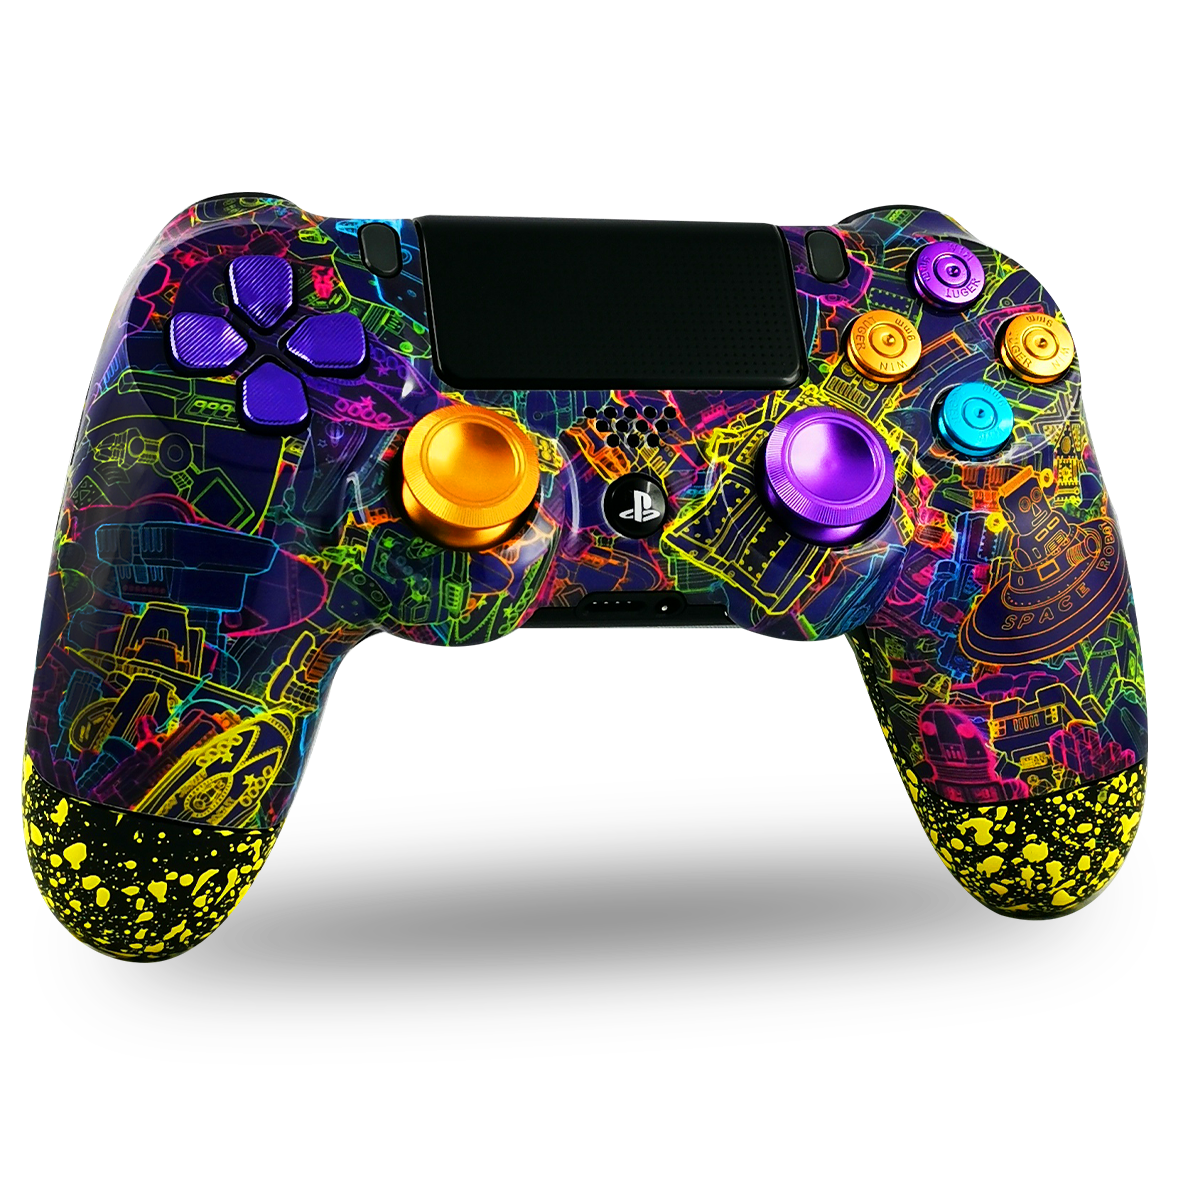 manette-PS4-custom-playstation-4-sony-personnalisee-drawmypad-inconnu3